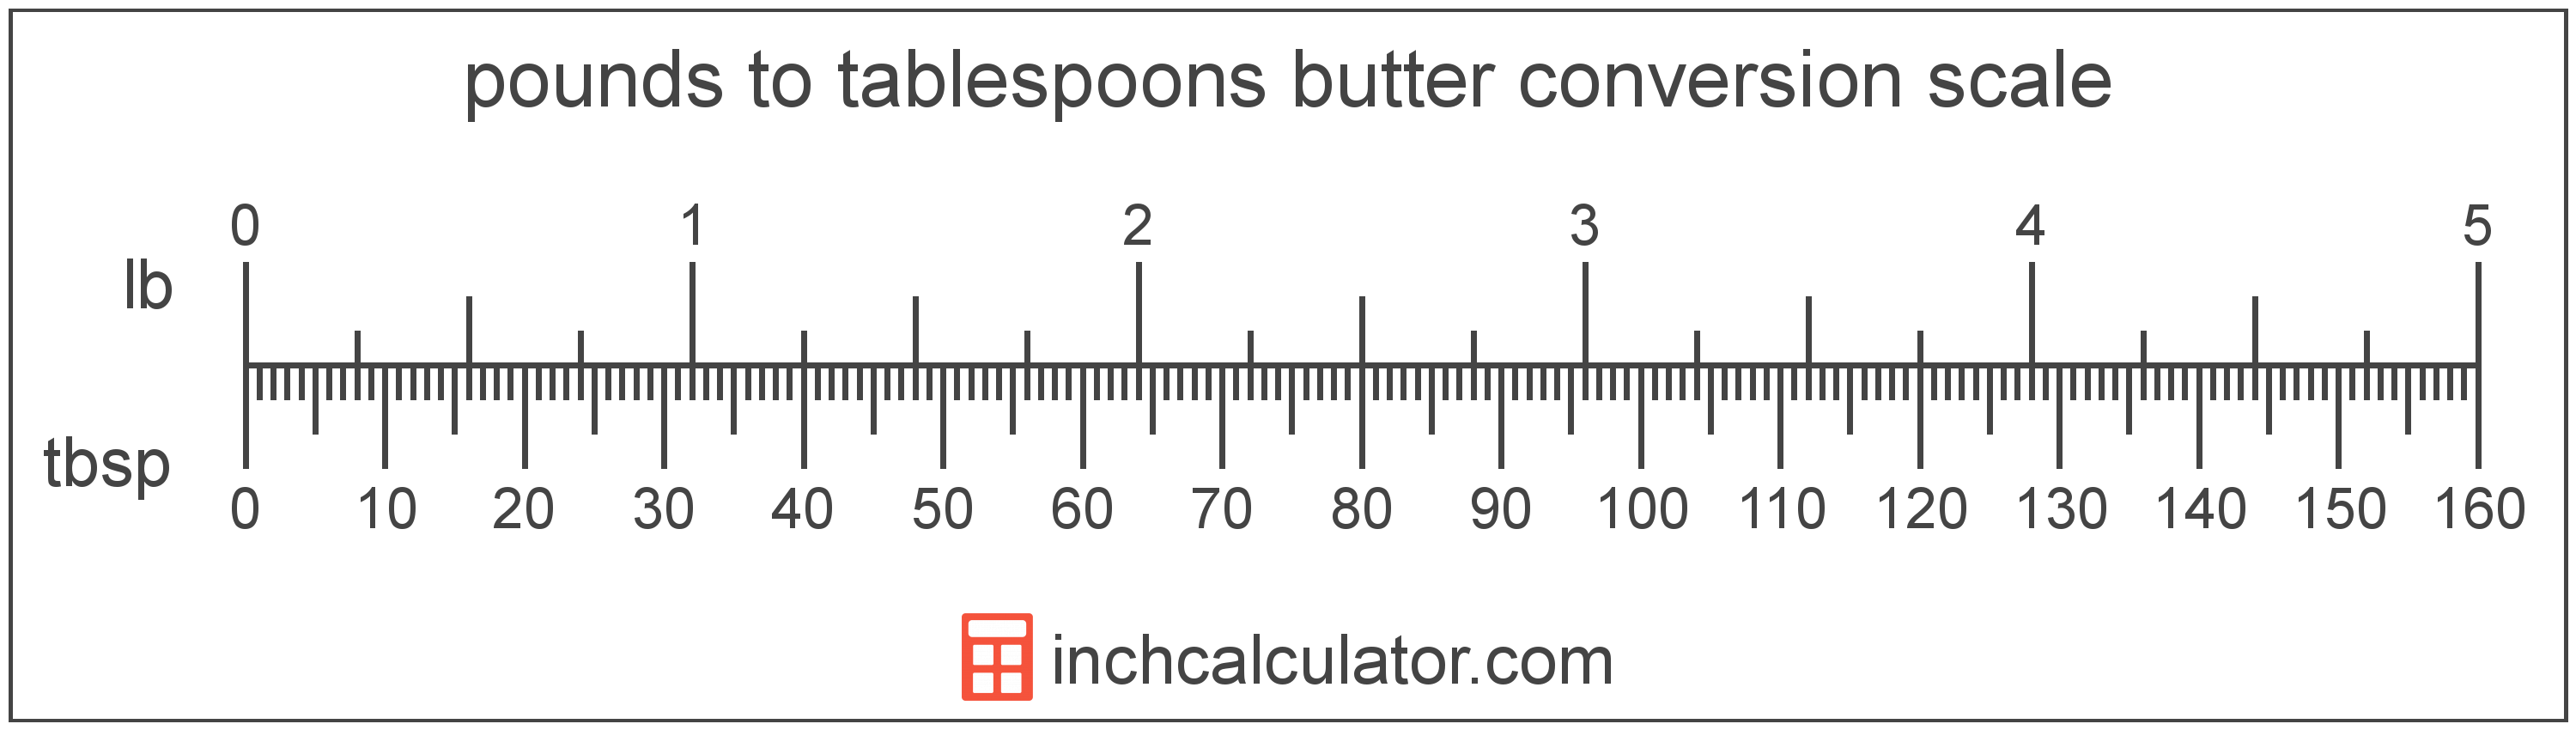 conversion scale showing pounds and equivalent tablespoons butter values